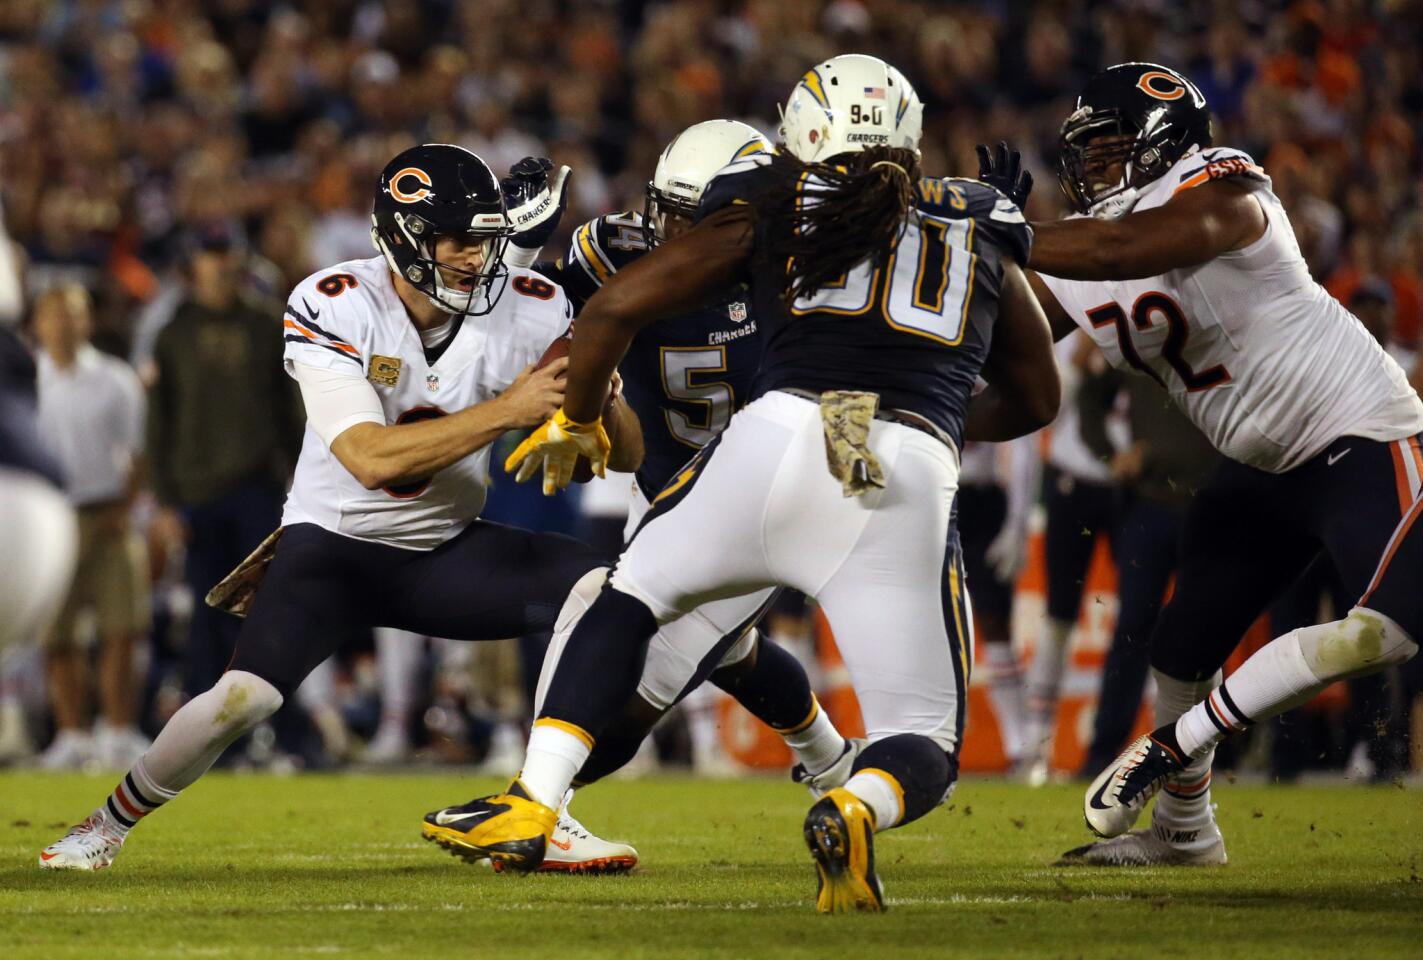 Jay Cutler is sacked by the Chargers defense and fumbles in the first quarter.